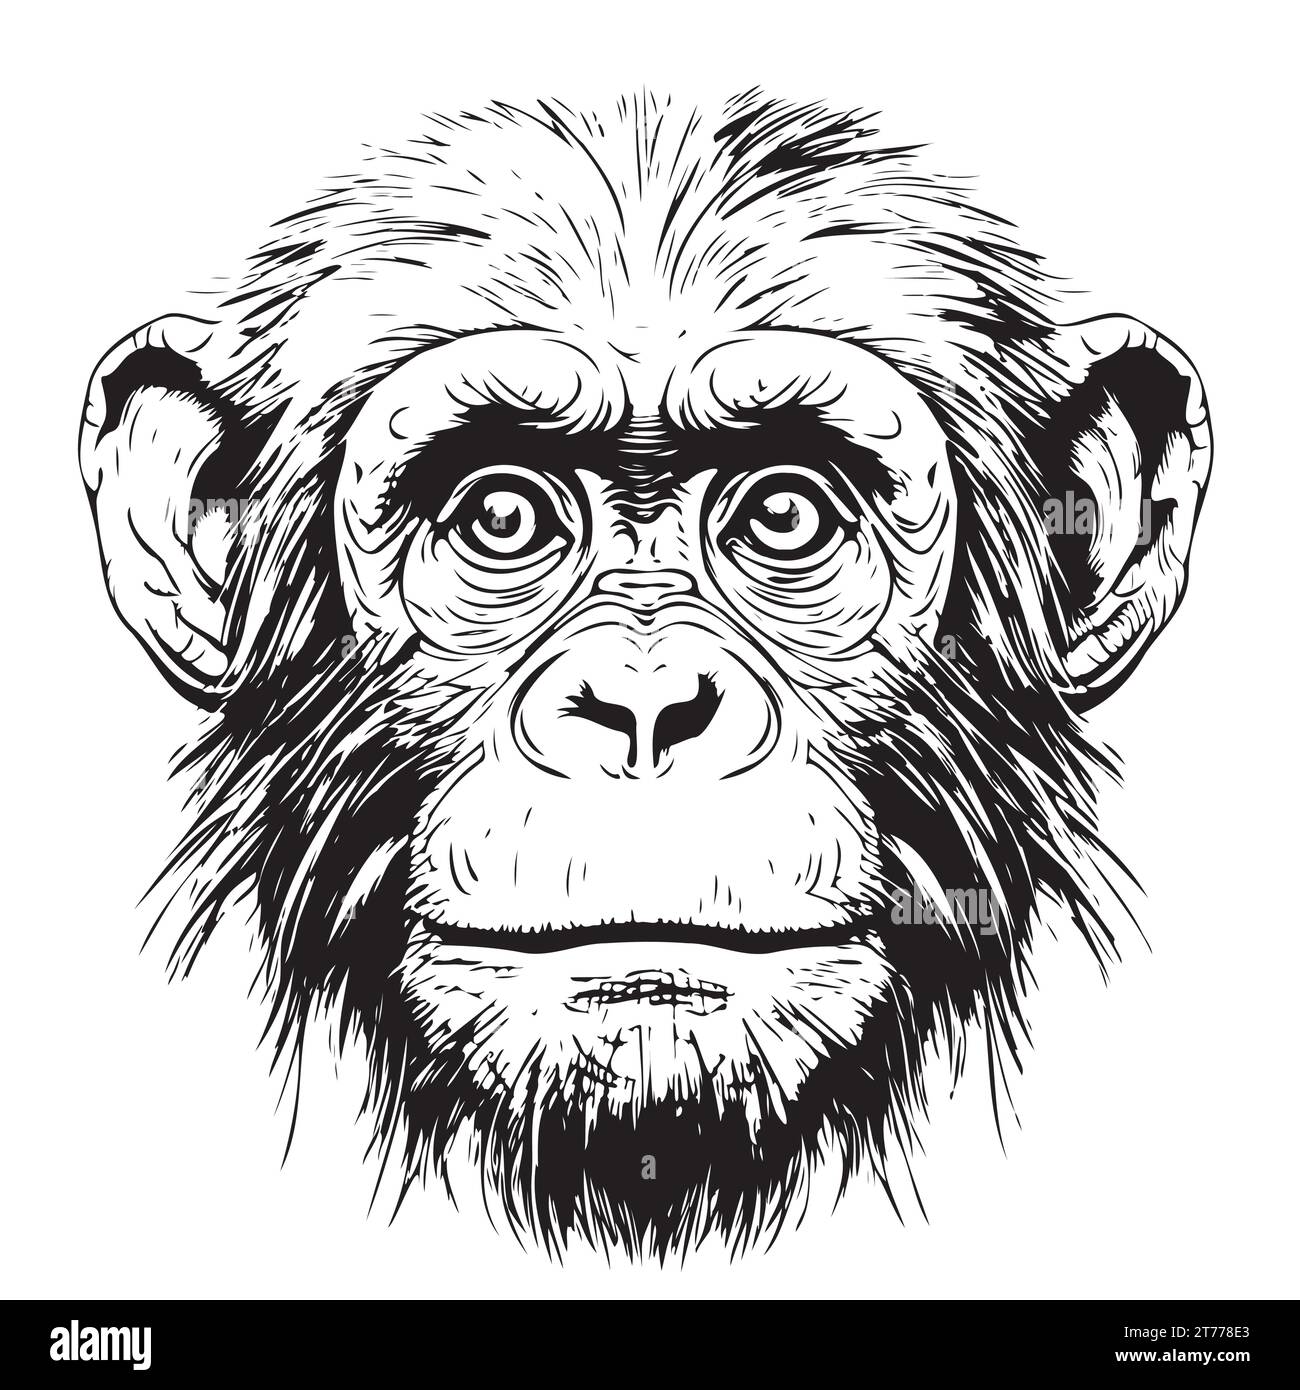 Monkey face sketch hand drawn in doodle style illustration Cartoon Stock Vector